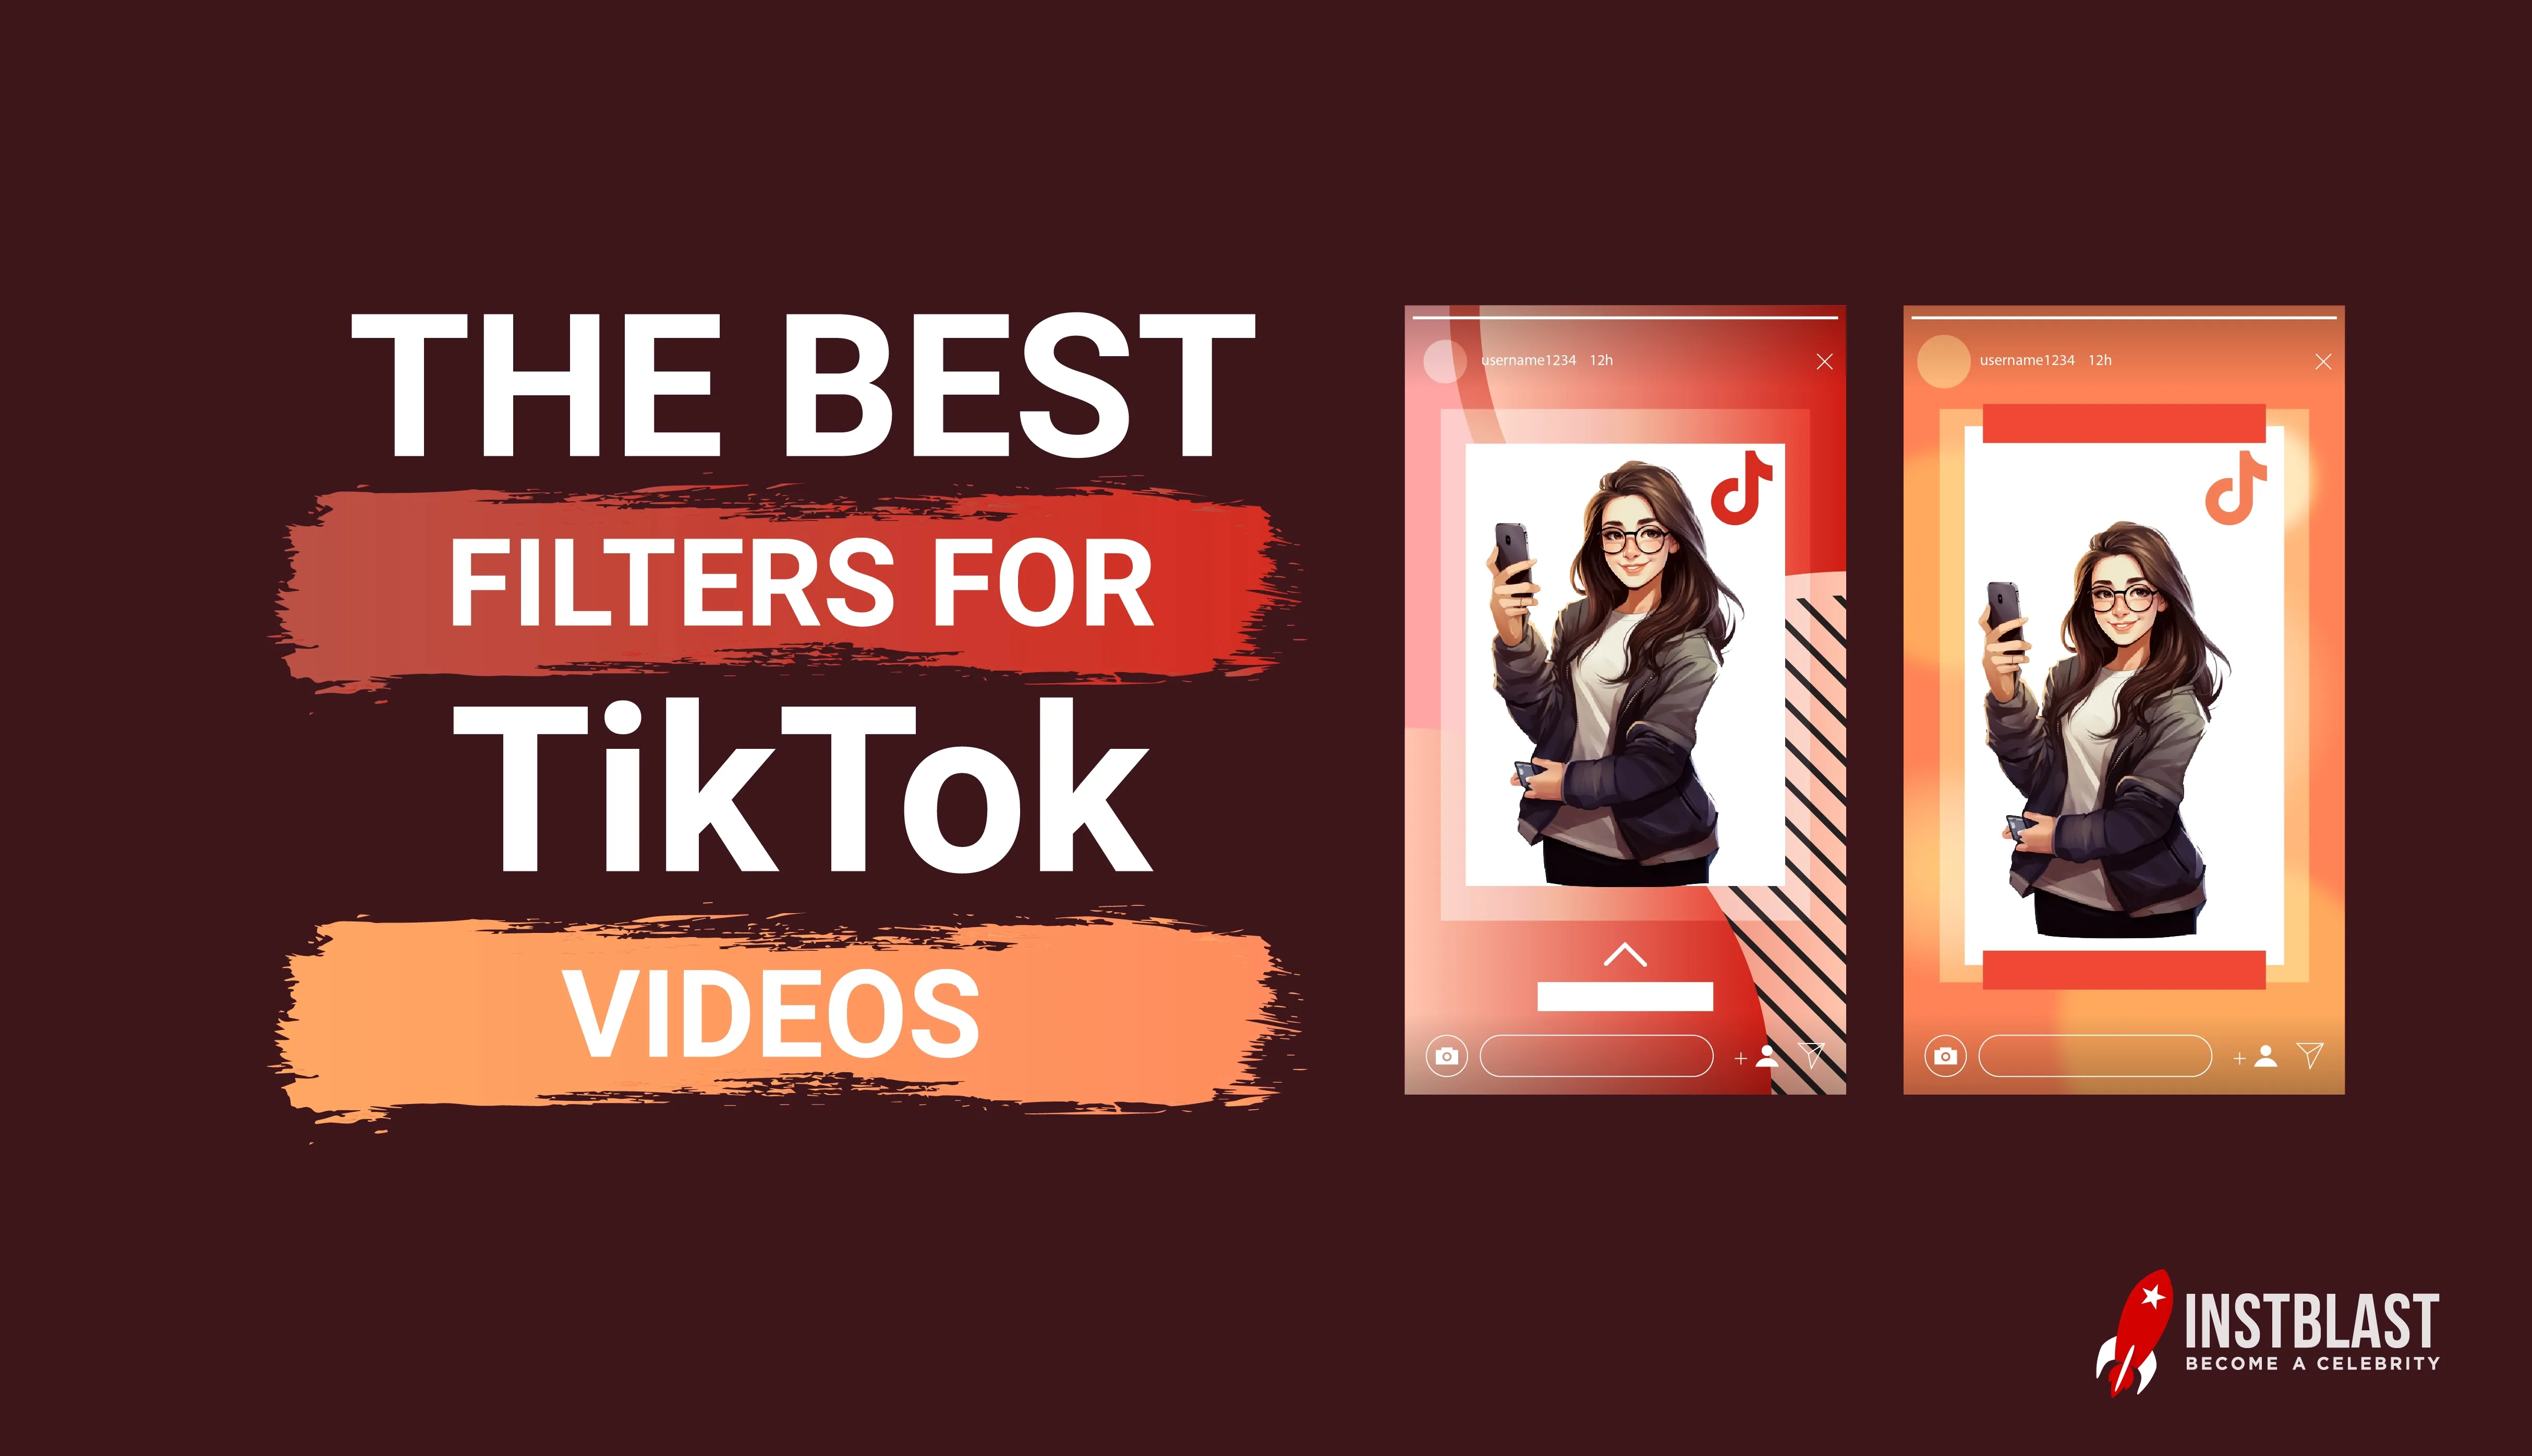 The Best Filters for TikTok Videos